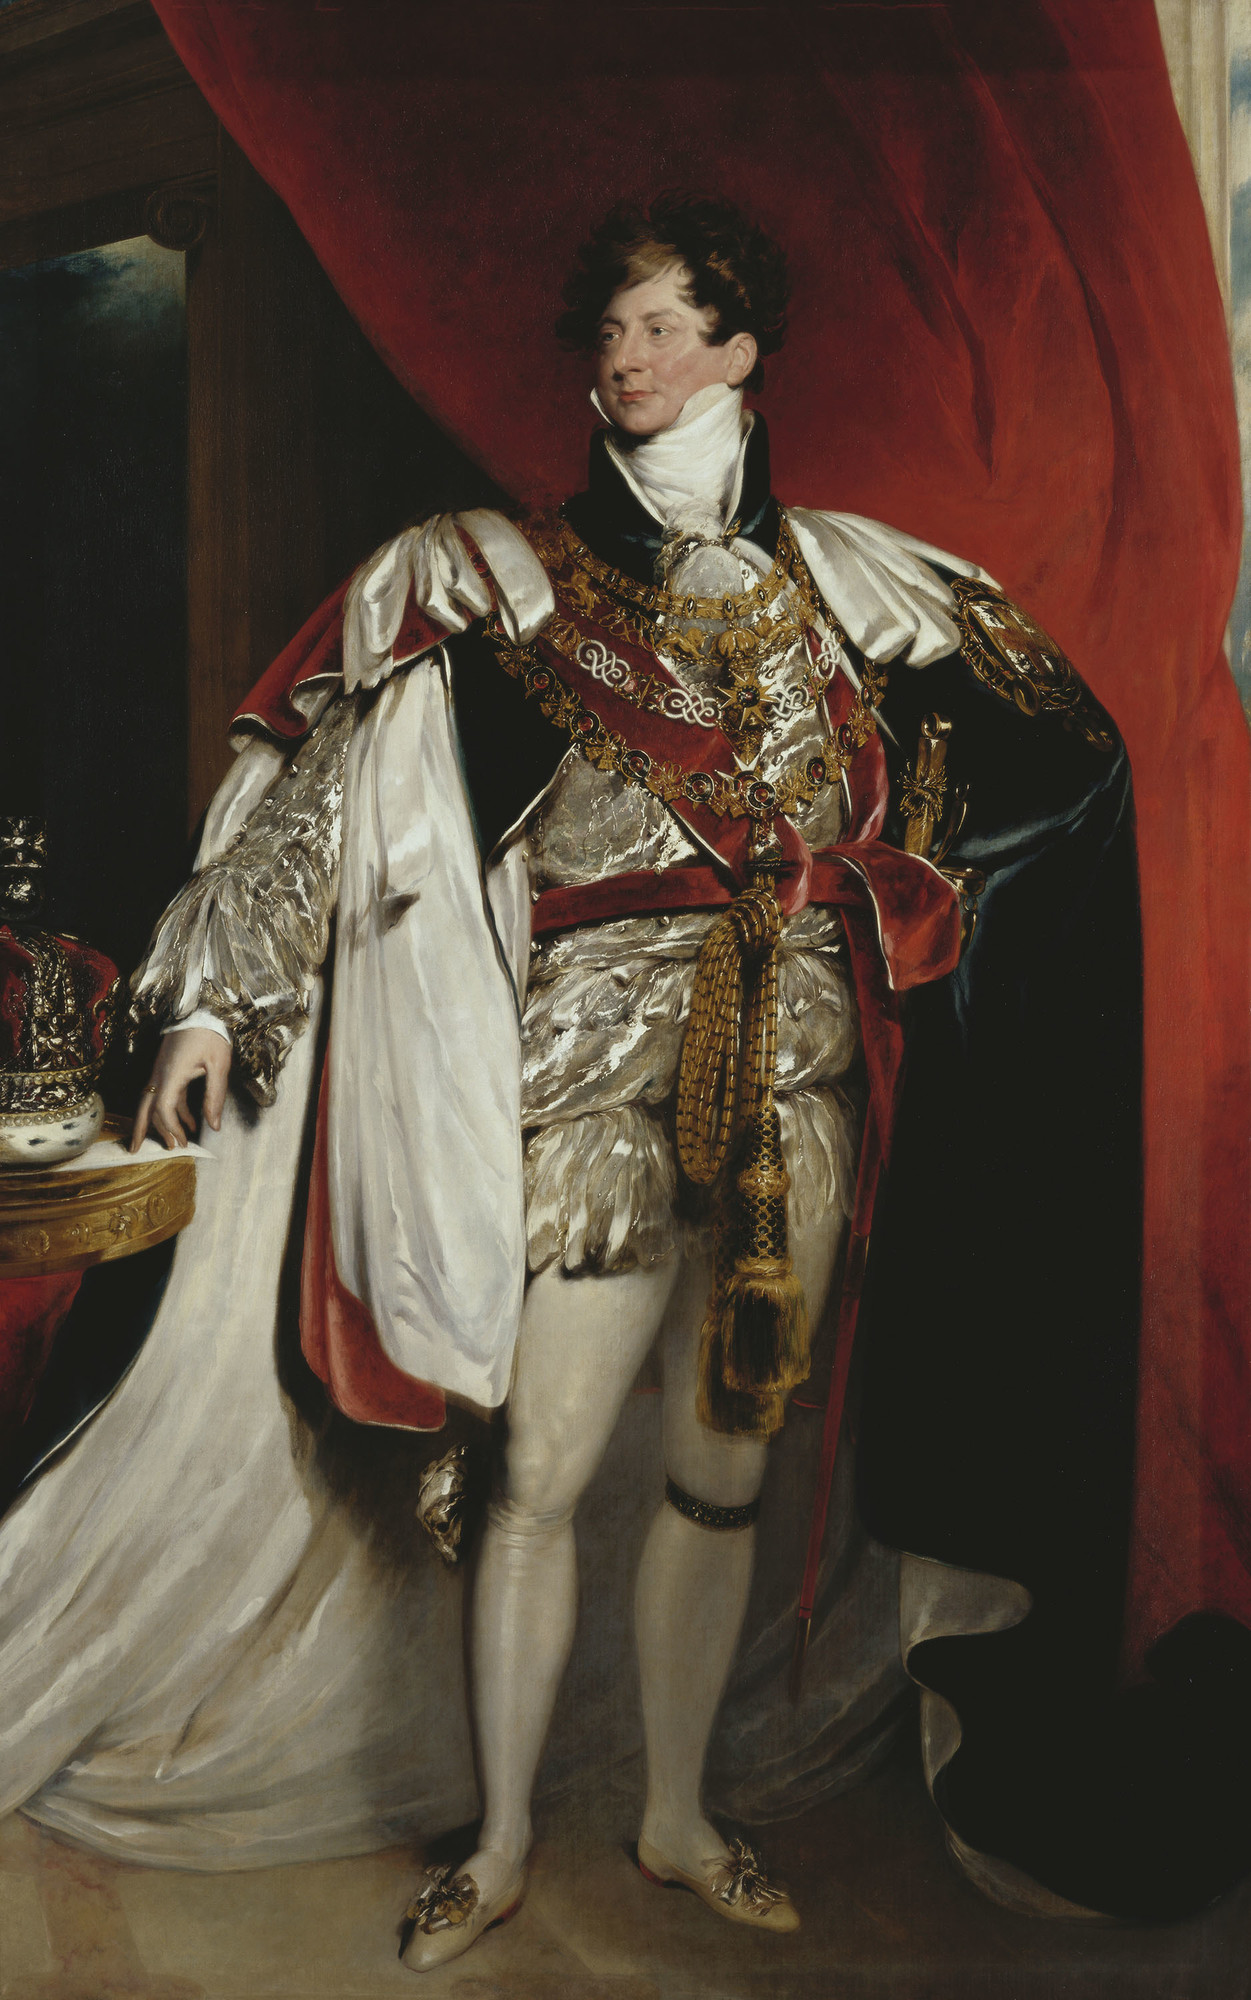 The Prince Regent, later King George IV